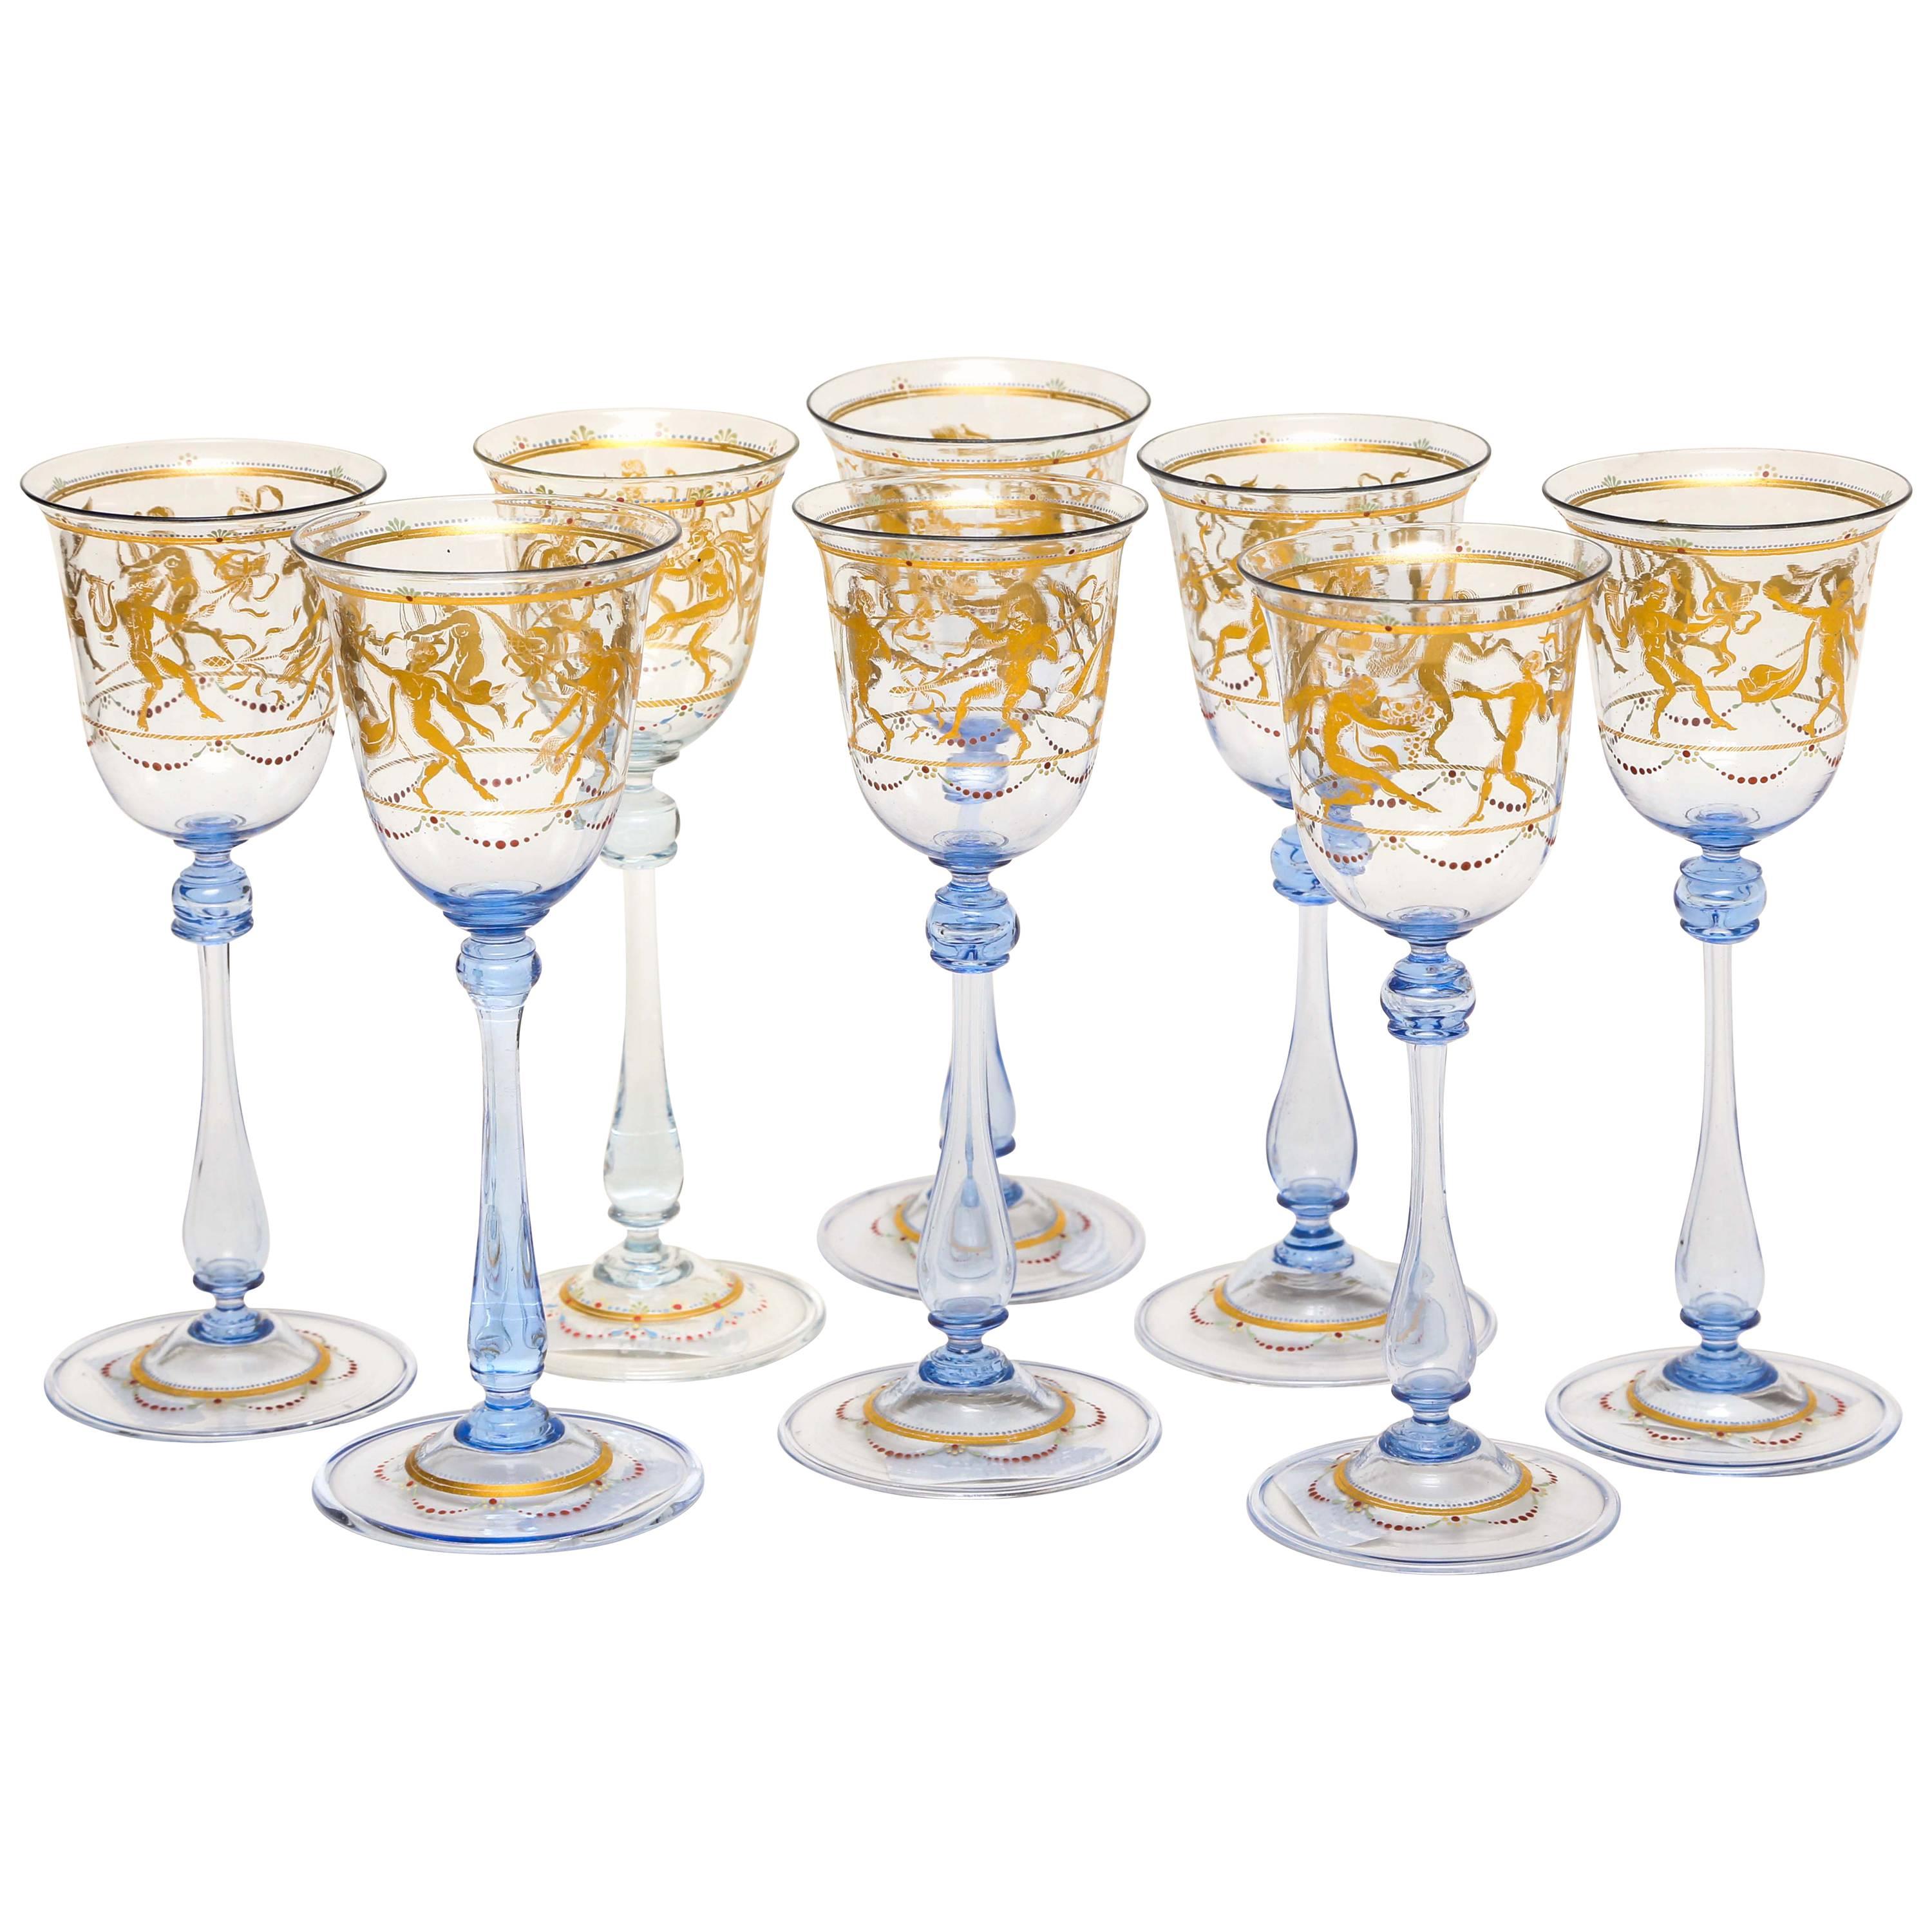 Eight Tall and Elegant Antique Venetian Wine Goblets, Hand-Painted 24-Karat Gold